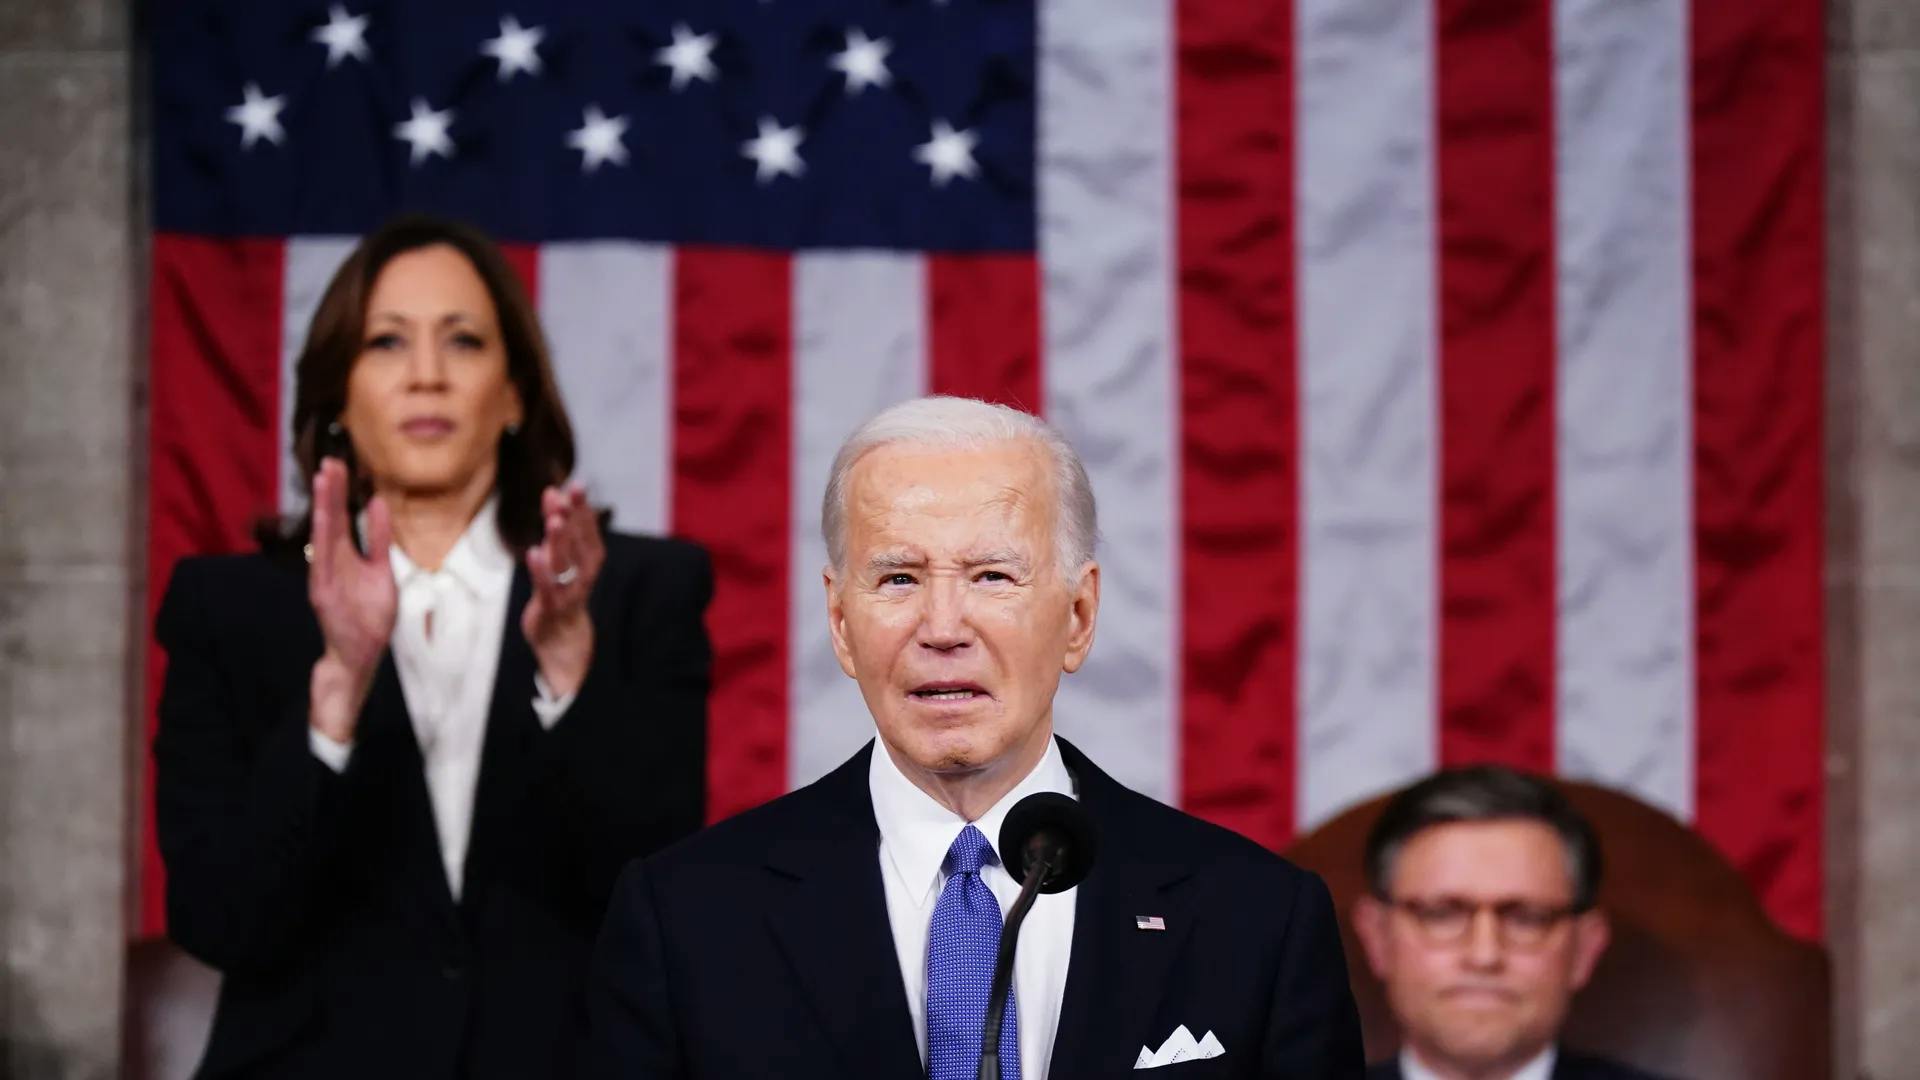 President Biden delivering the State of the Union